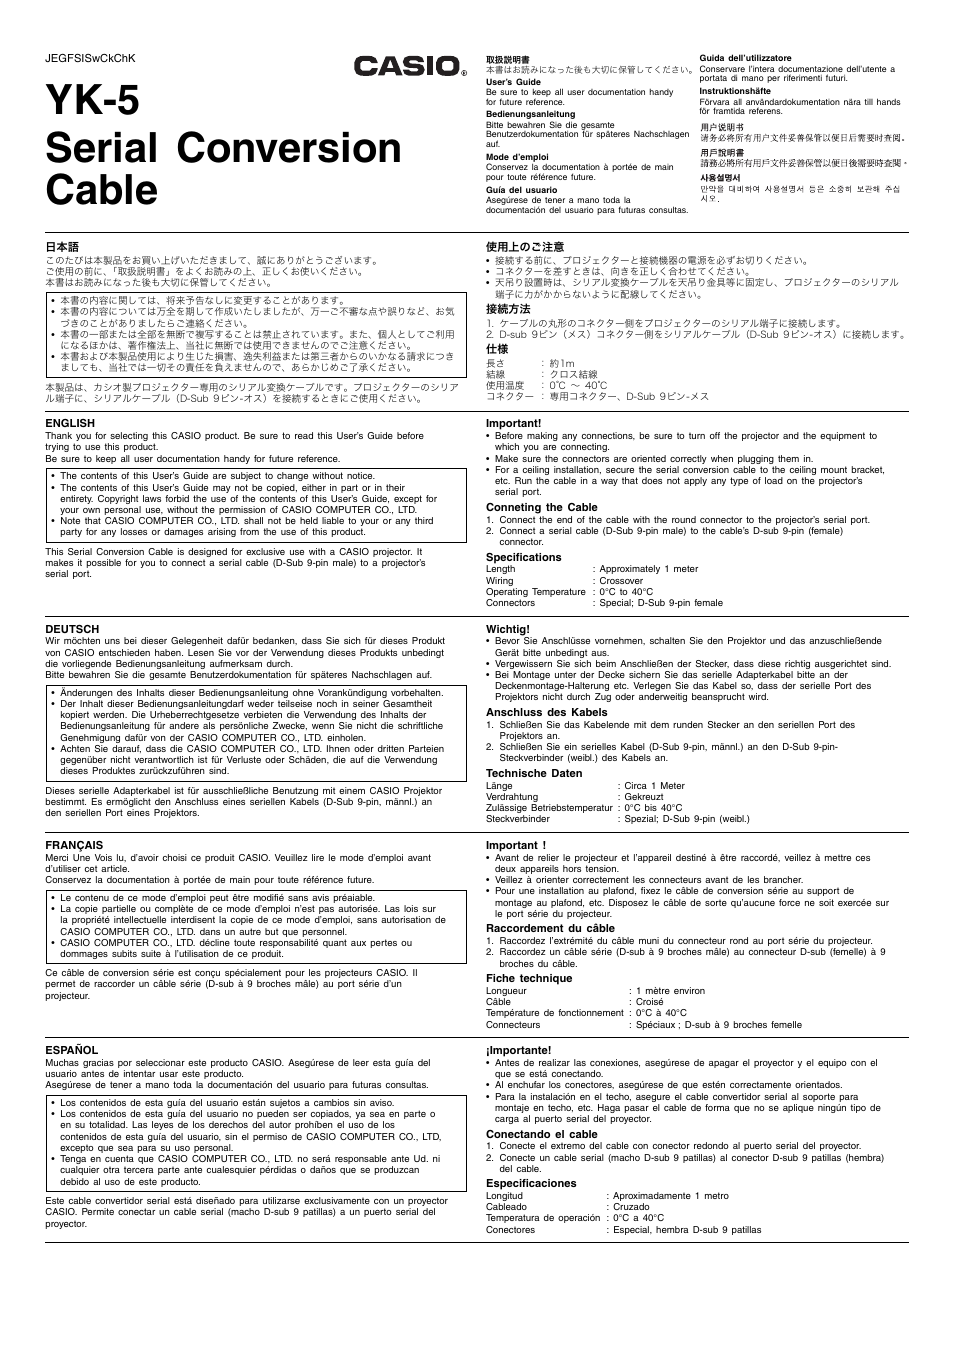 Casio YK-5 User Manual | 2 pages